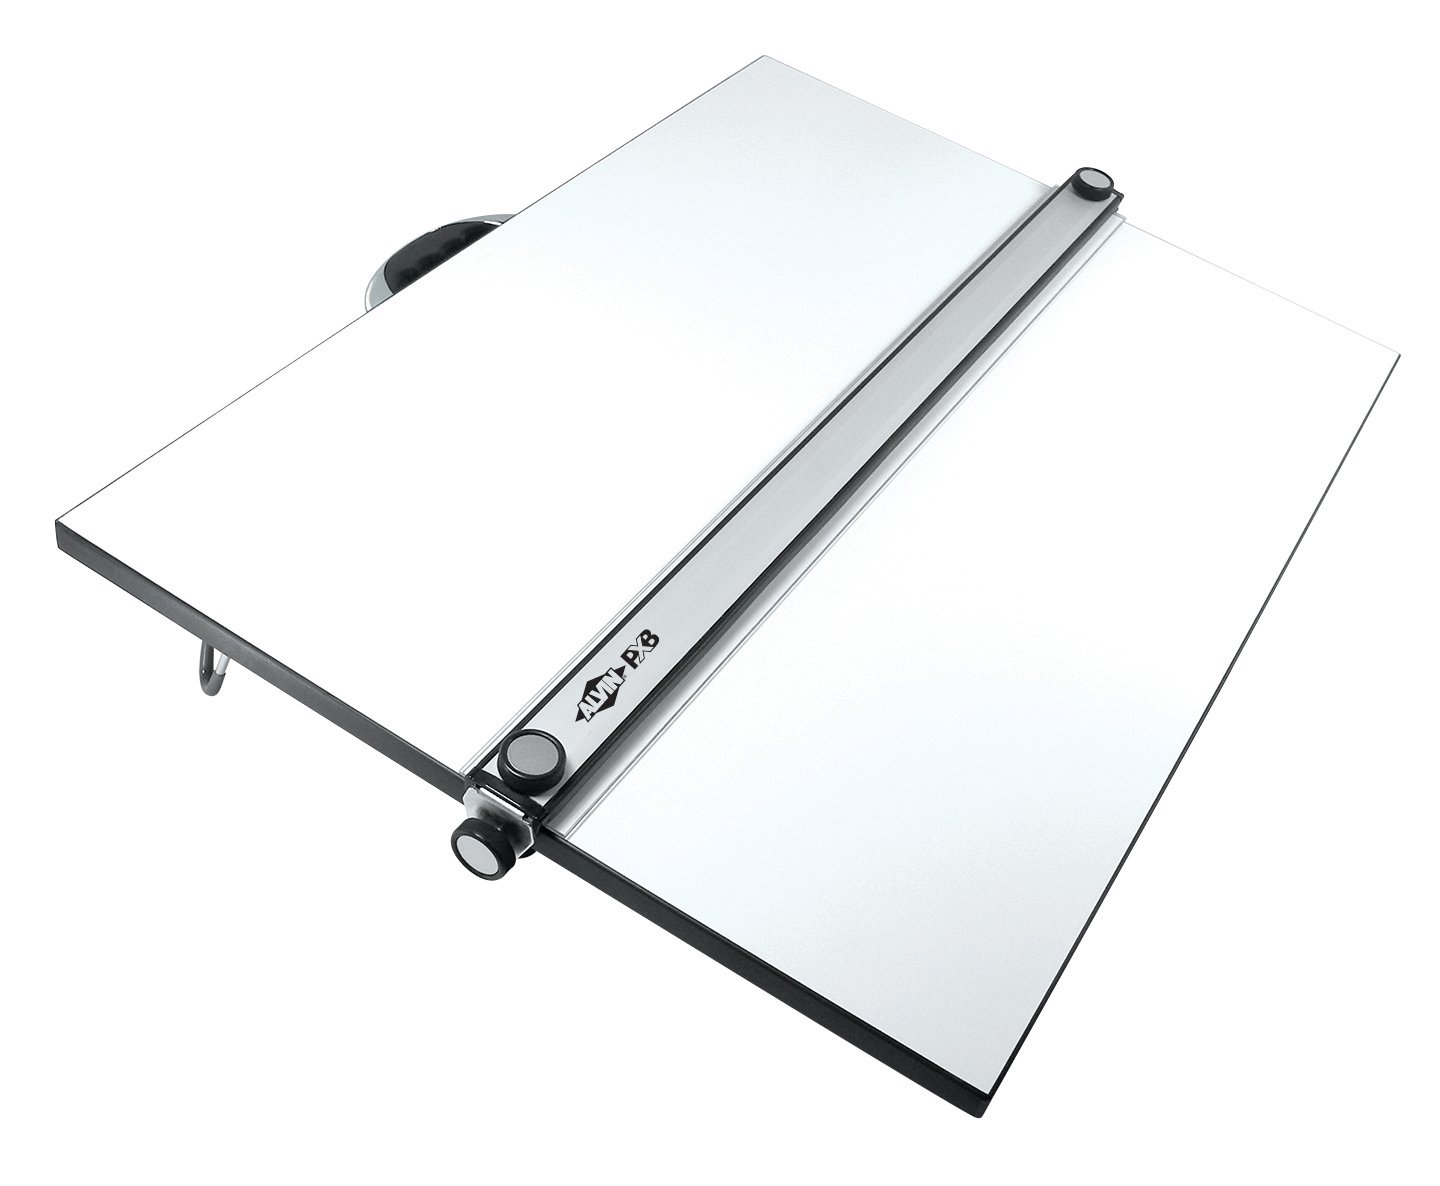 ALVIN Portable Drafting Board Size 18 x 24 Model PXB24 Easily Adjustable  Drafting and Architecture Tool for Students and Professionals Drawing Board  with Ergonomic Carrying Handle - 18 x 24 Inches 24